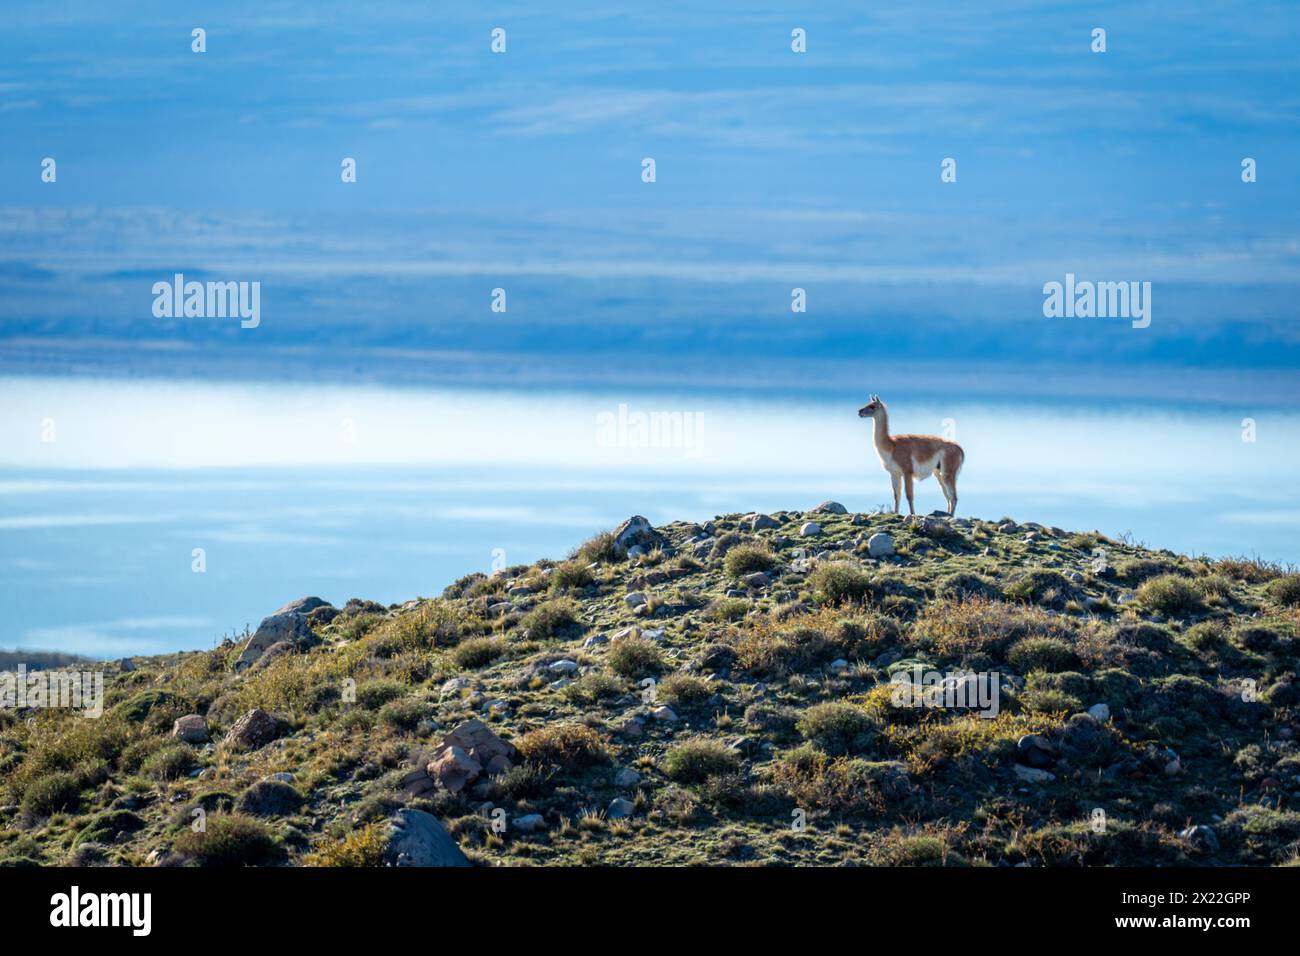 Guanaco stands on grassy mound in profile Stock Photo